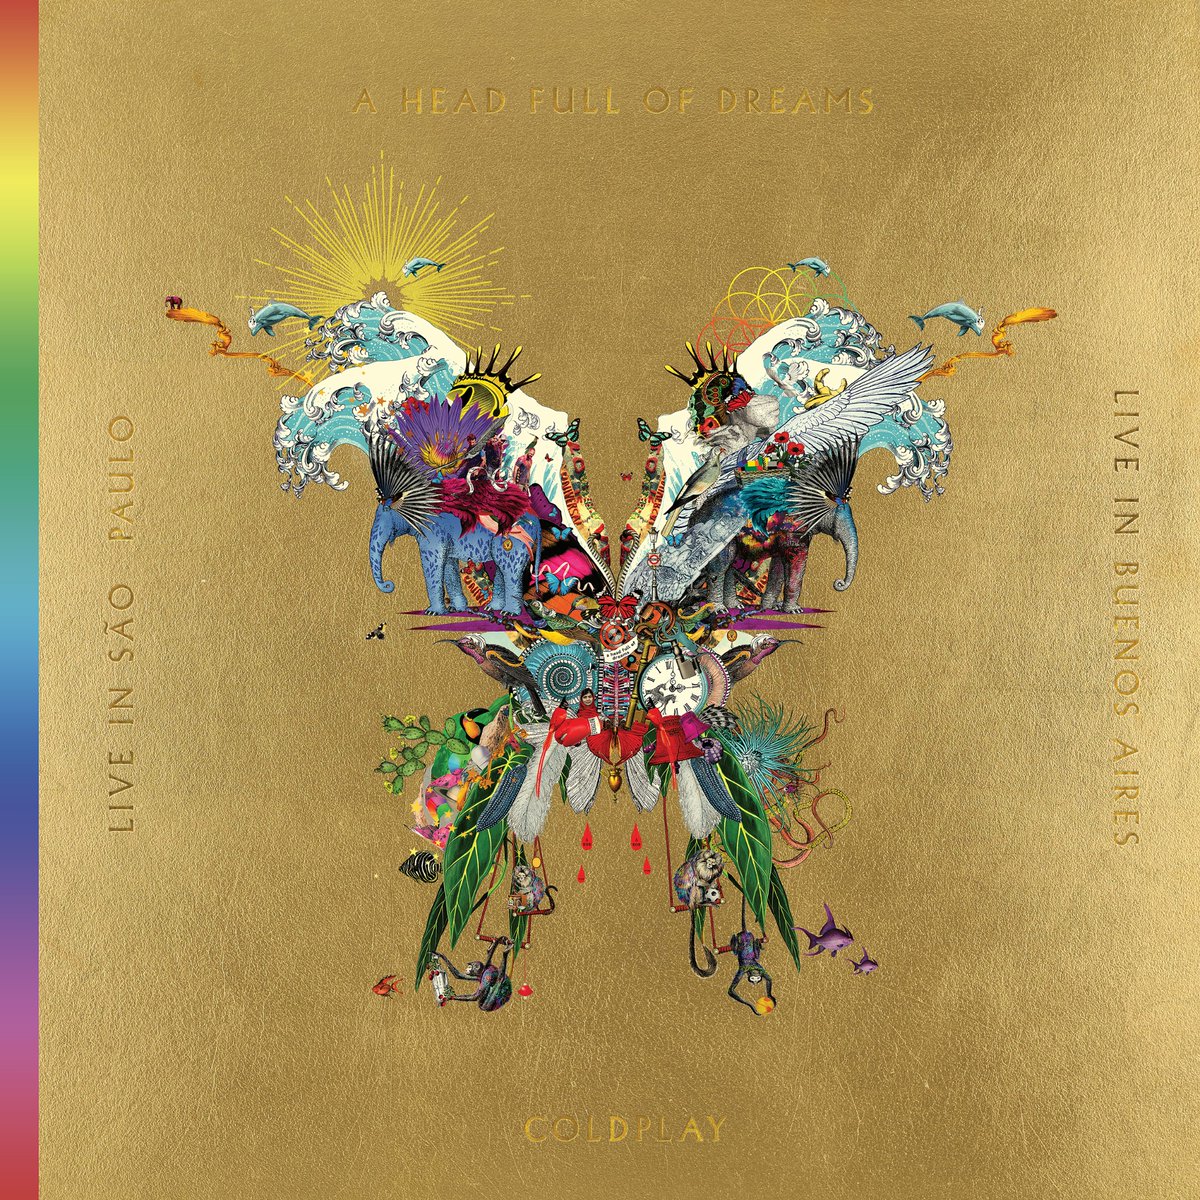 Coldplay: Live In Buenos Aires Vinyl / Live In Sao Paulo DVD / A Head Full  of Dreams